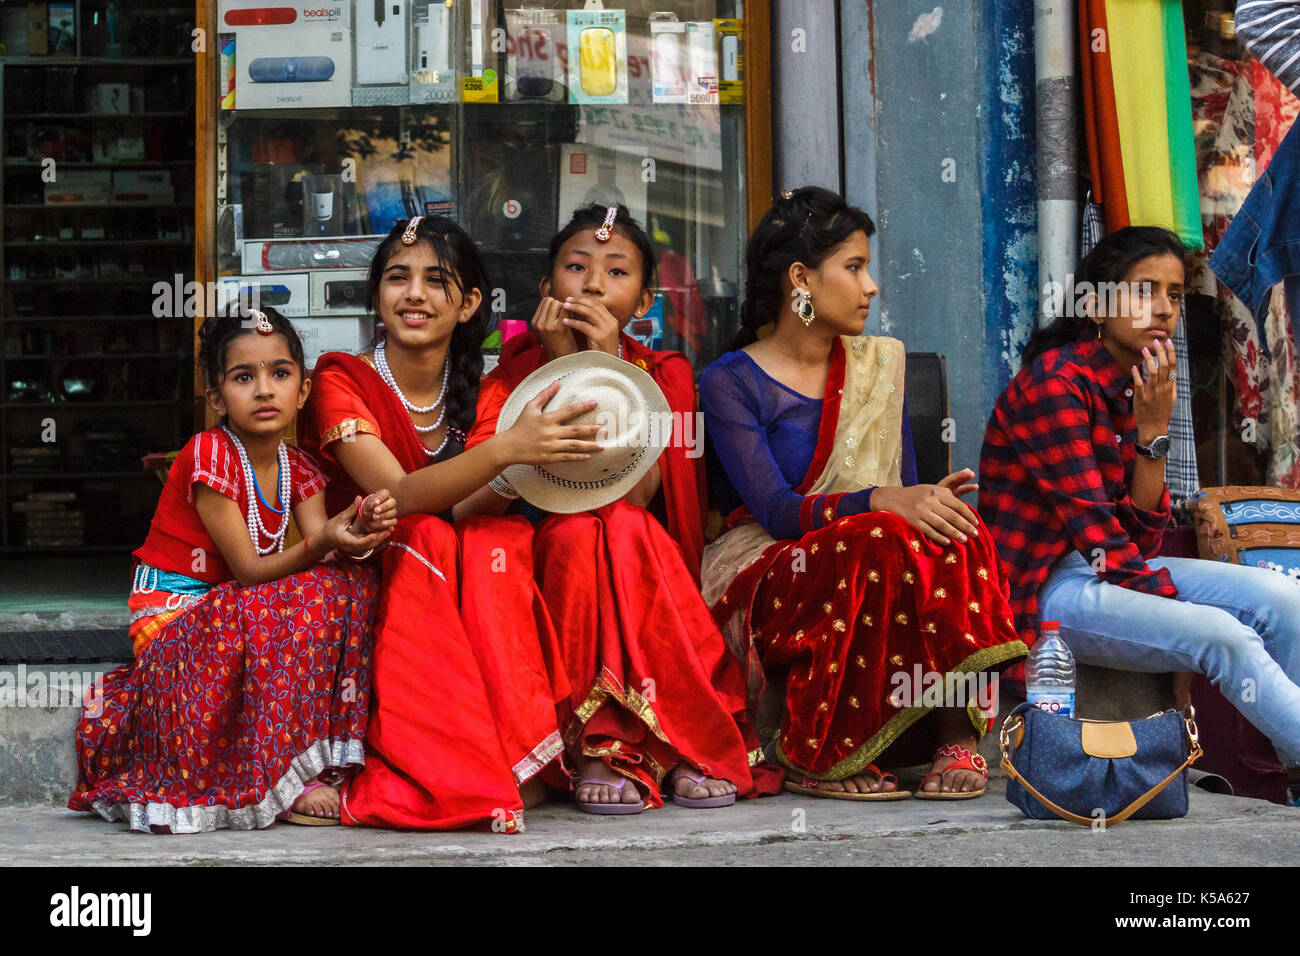 POKHARA, NEPAL - 11/9/2015: Girls in traditional clothes during the Tihar festival in Pokhara, Nepal. Stock Photo